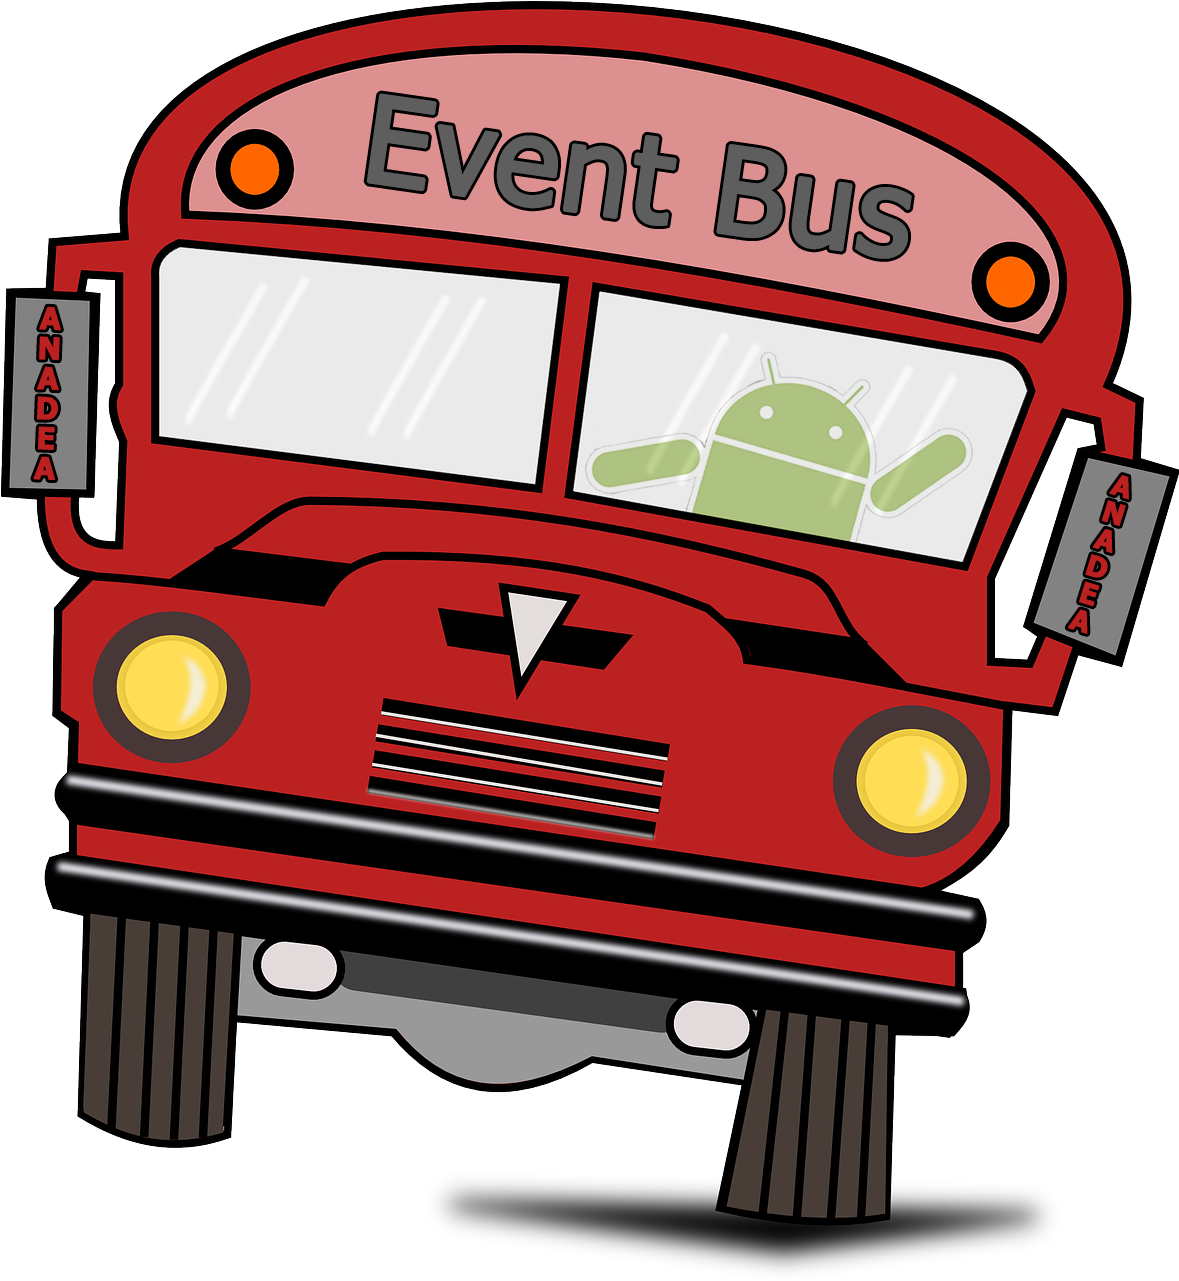 An Event Bus For Android - World's Best Bus Driver, Bag, Tote, Bespoke Tote Bag (1800x1280)